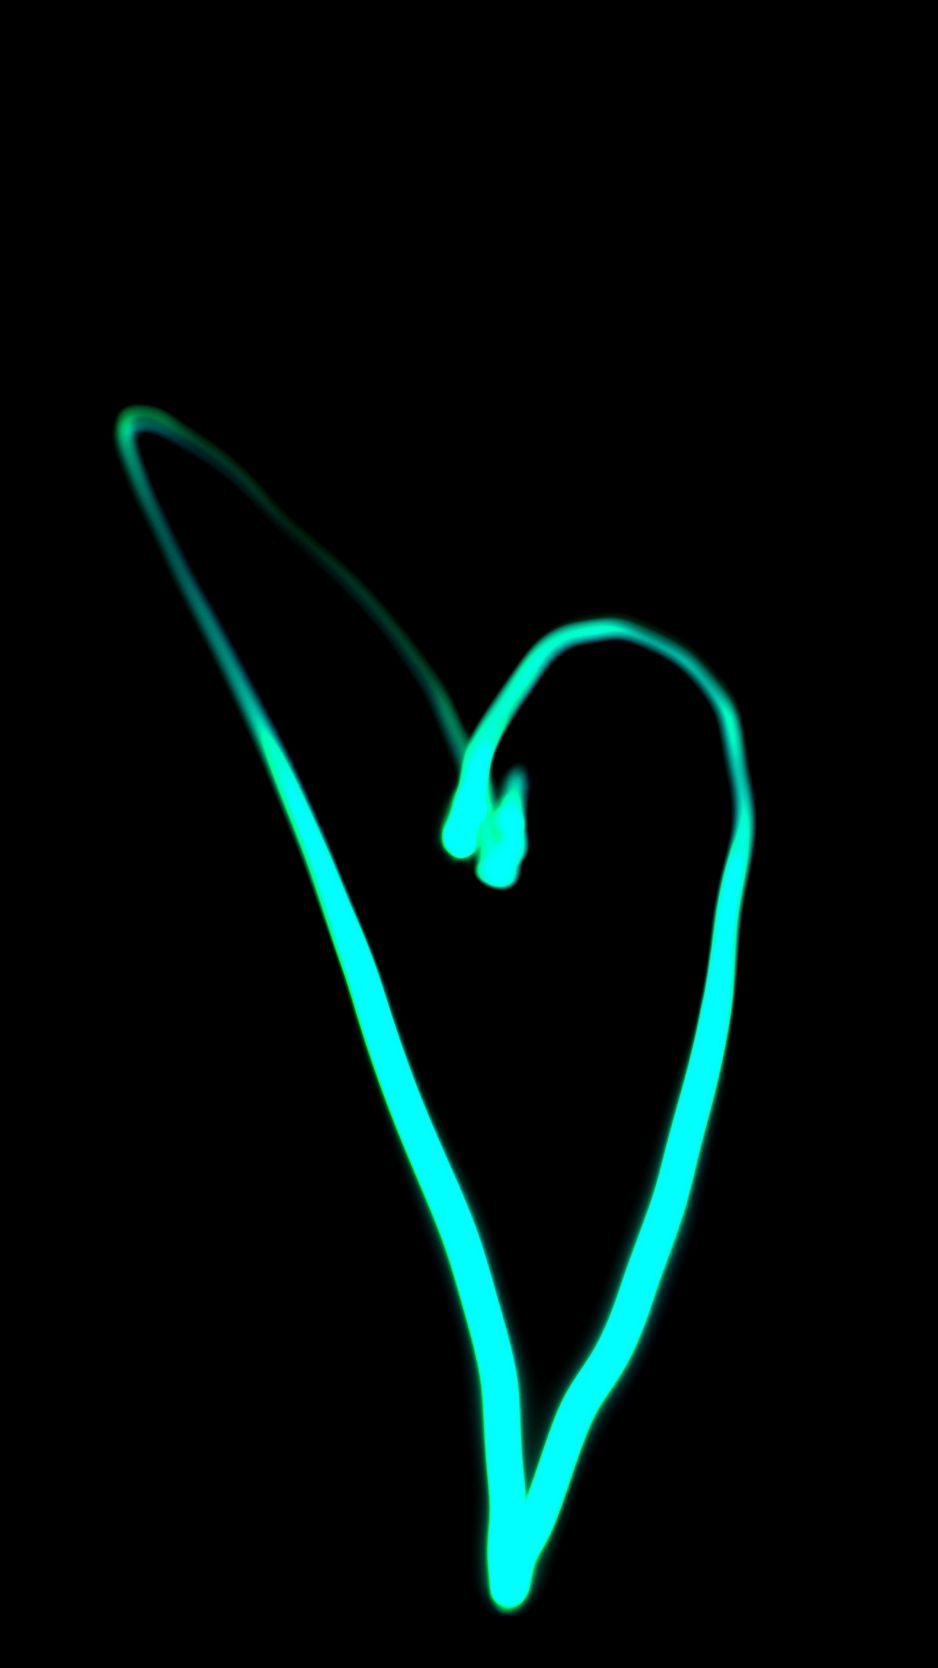 Download wallpaper 938x1668 heart, neon, blue, black background iphone  8/7/6s/6 for parallax hd background